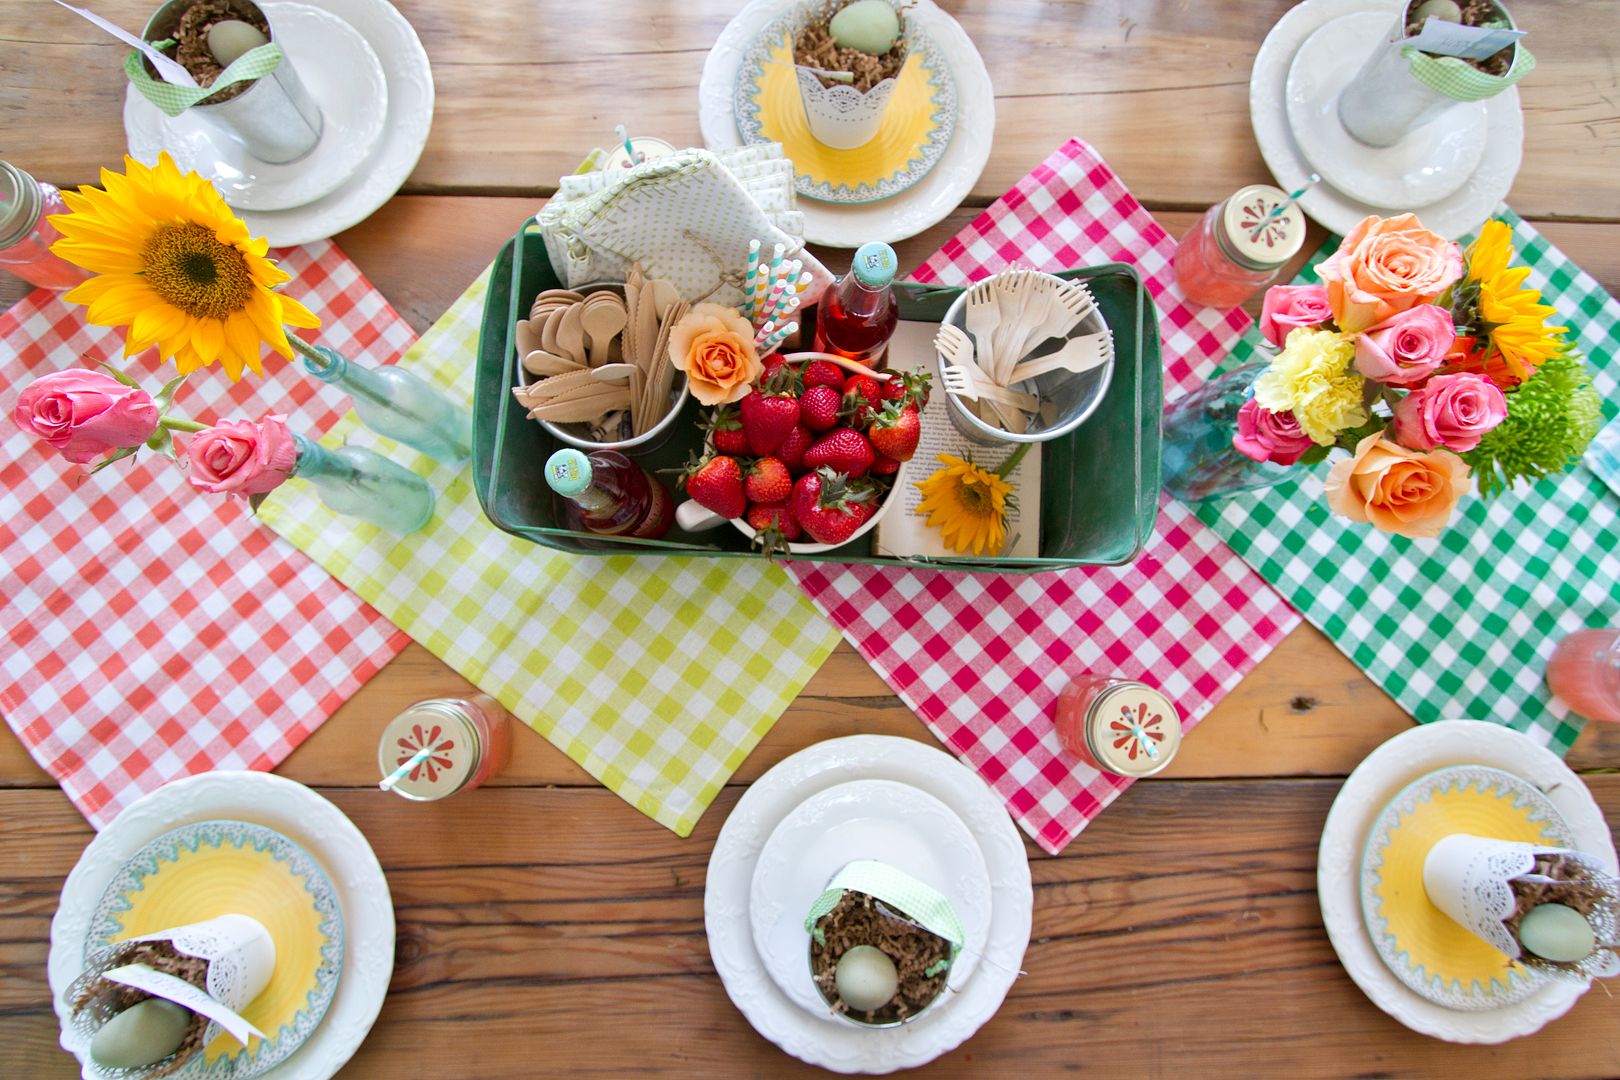 Simple Spring Tablescape | Picnic Inspired | perfectly imperfect